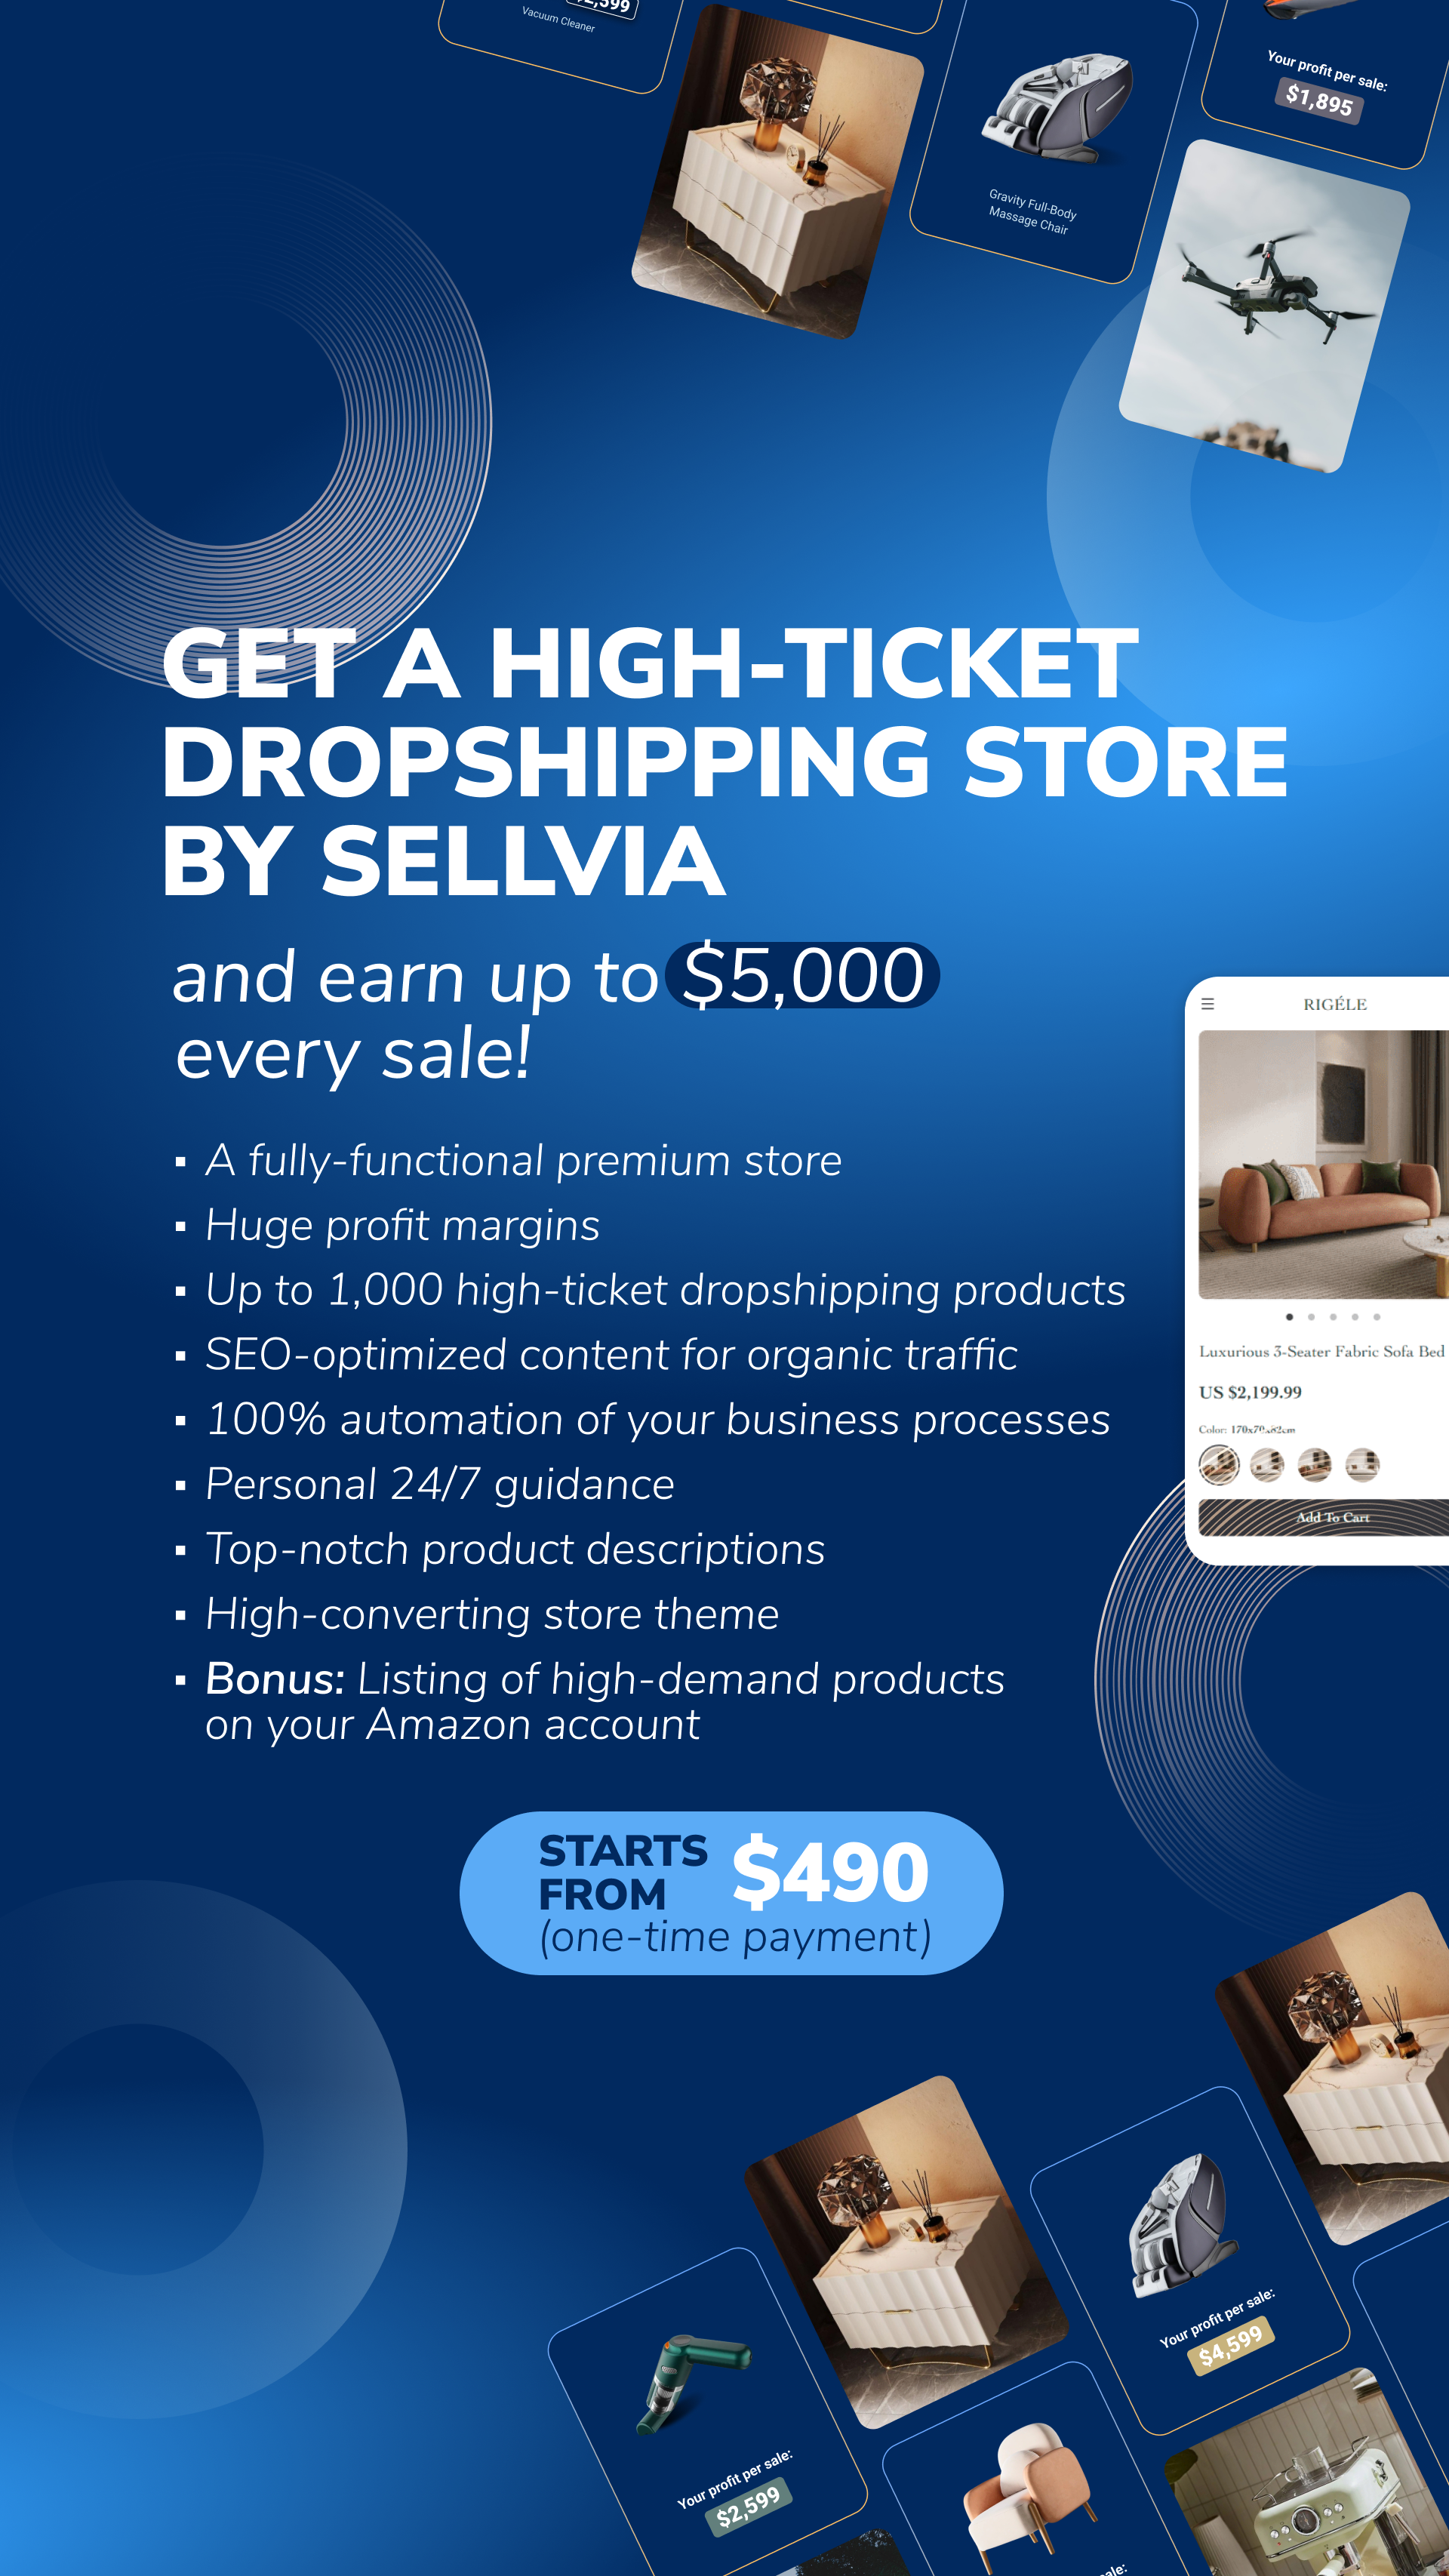 Get a High-Ticket Dropshipping Store and earn up to $5,000 per every sale